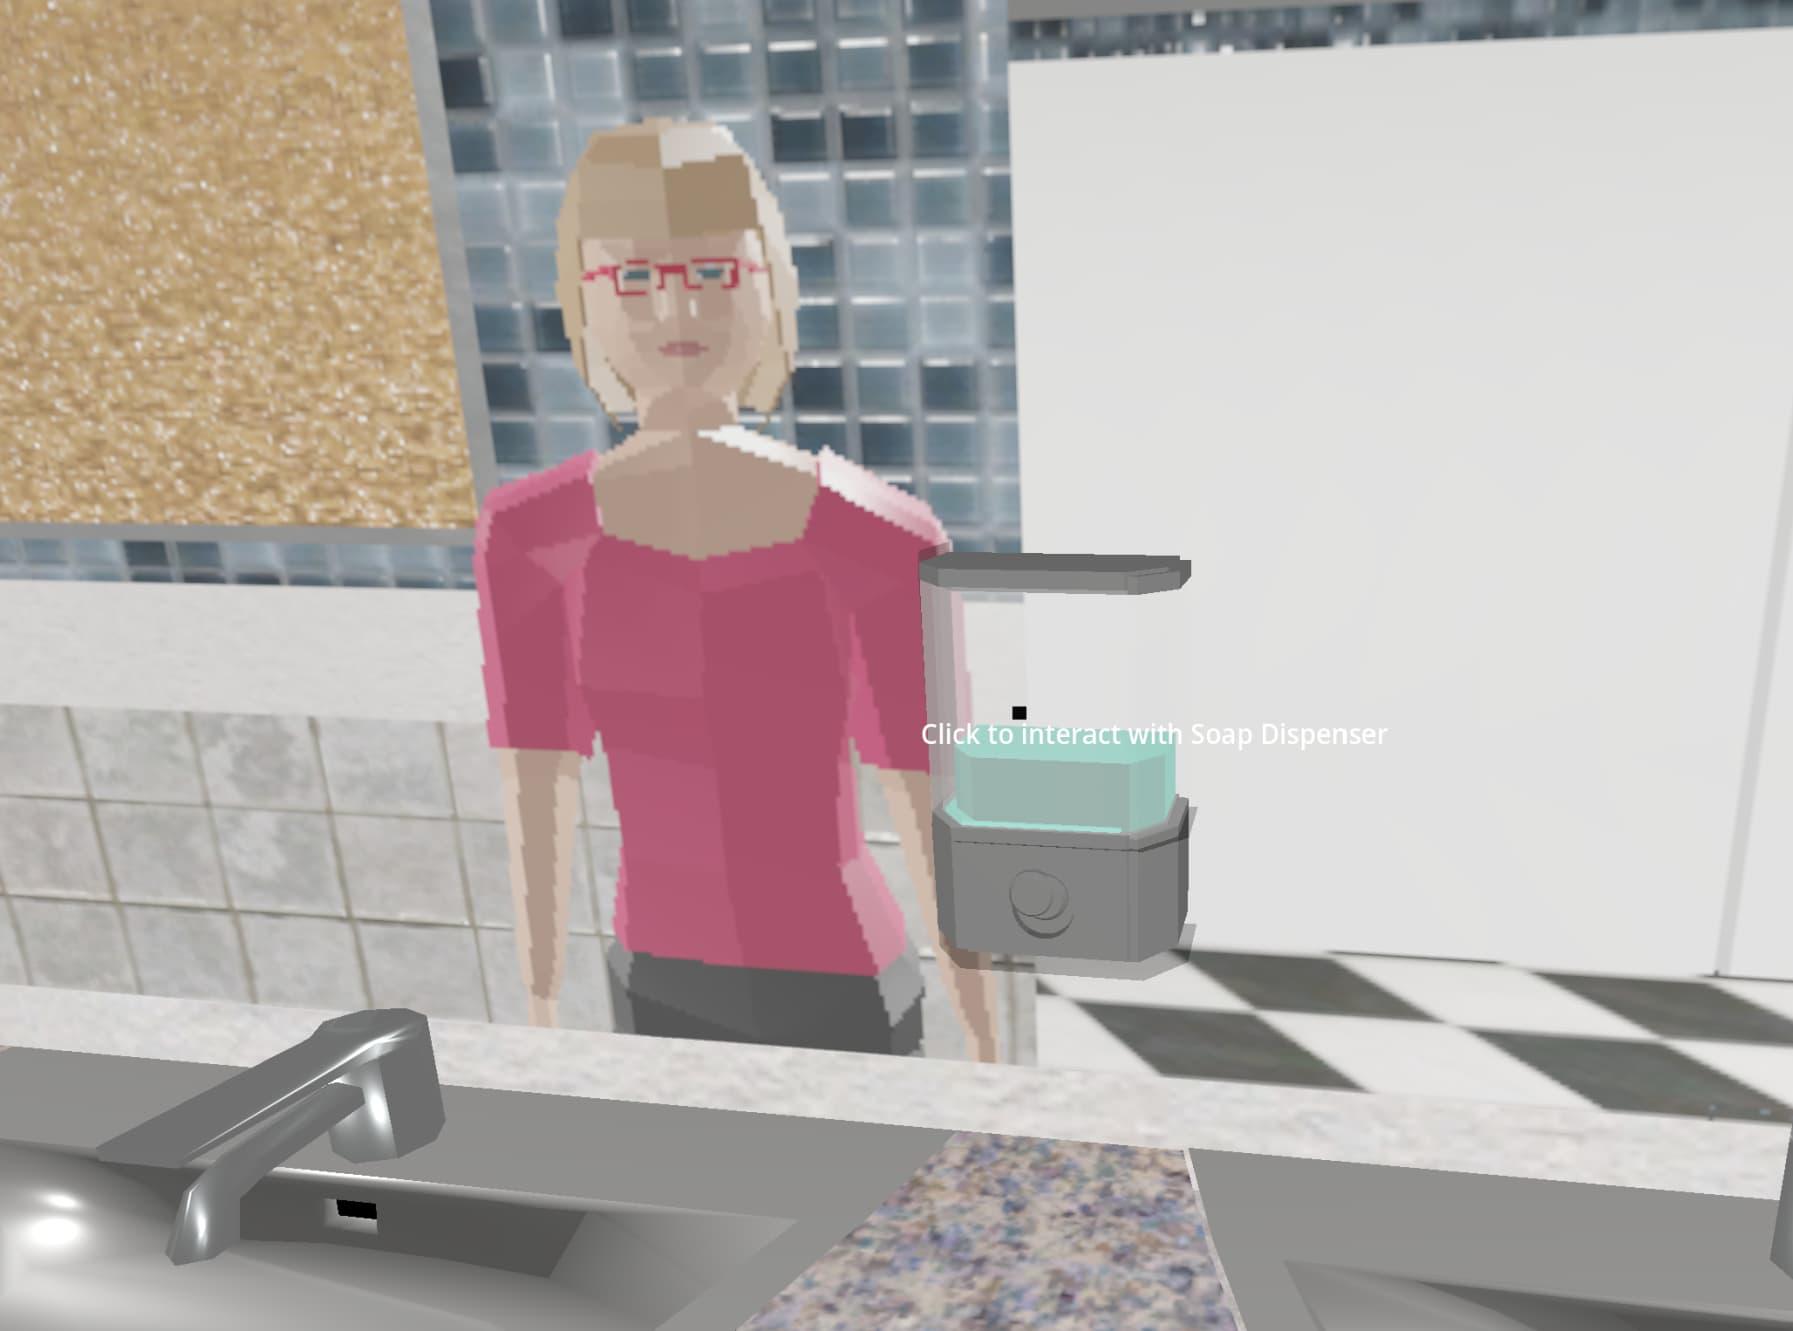 A game screenshot of a blonde woman with red glasses wearing a pink shirt and black pants, standing in front of a bathroom counter, looking at a soap dispenser, and reflected in the mirror